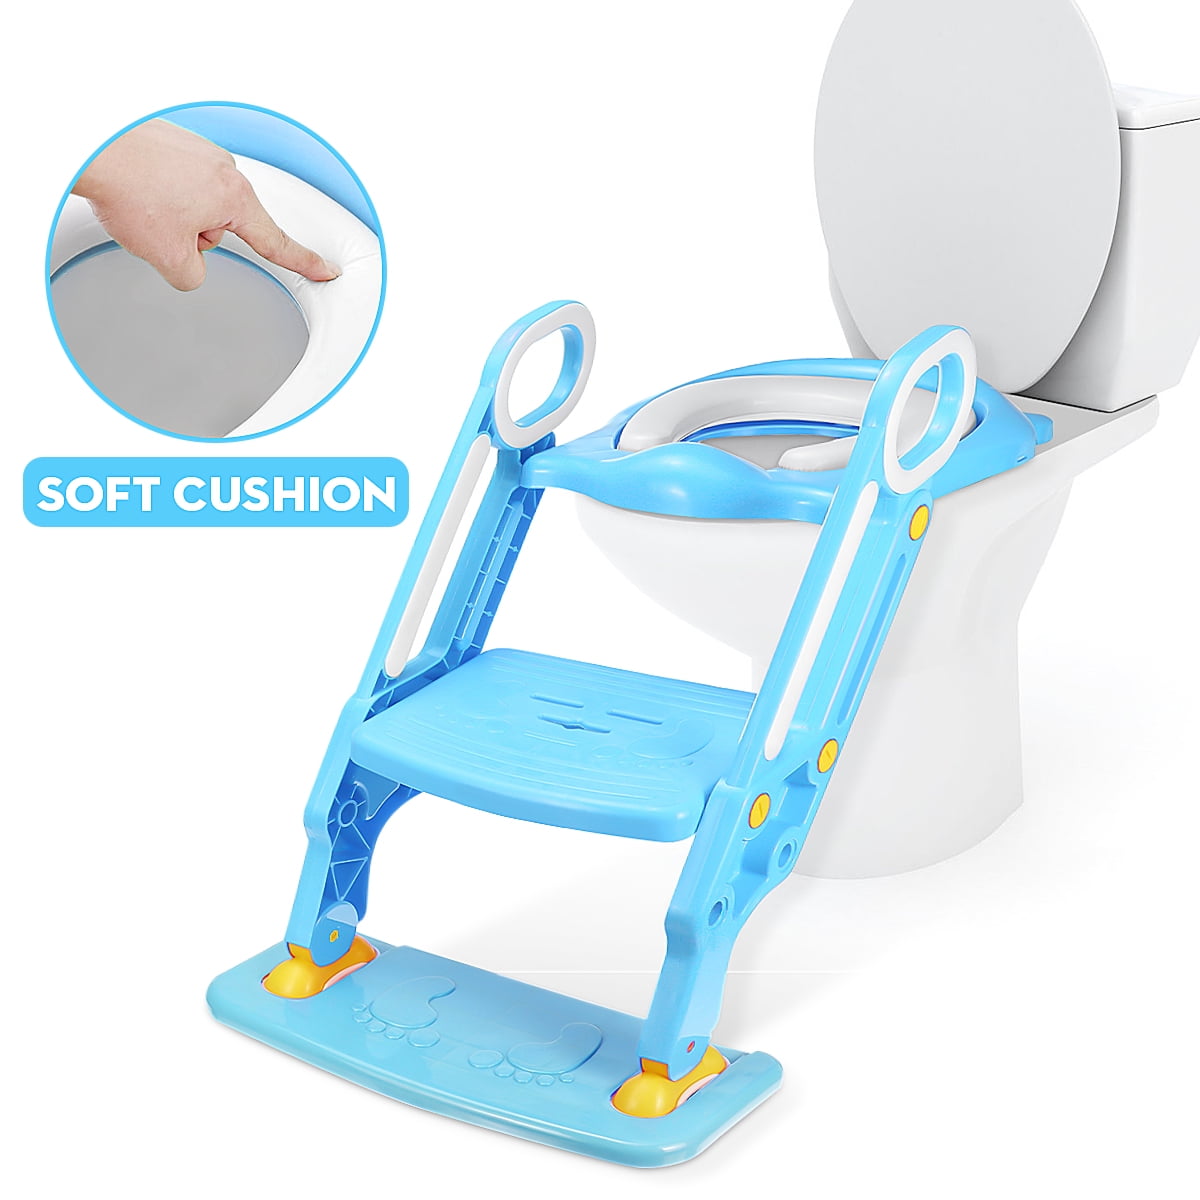 Potty Training Toilet Seat with Step Stool Ladder Toddlers Foldable Potty Training Chair Seats with Handles Splash Guard for Kids Boys Girlsles Splash Guard for Kids Boys Girls 